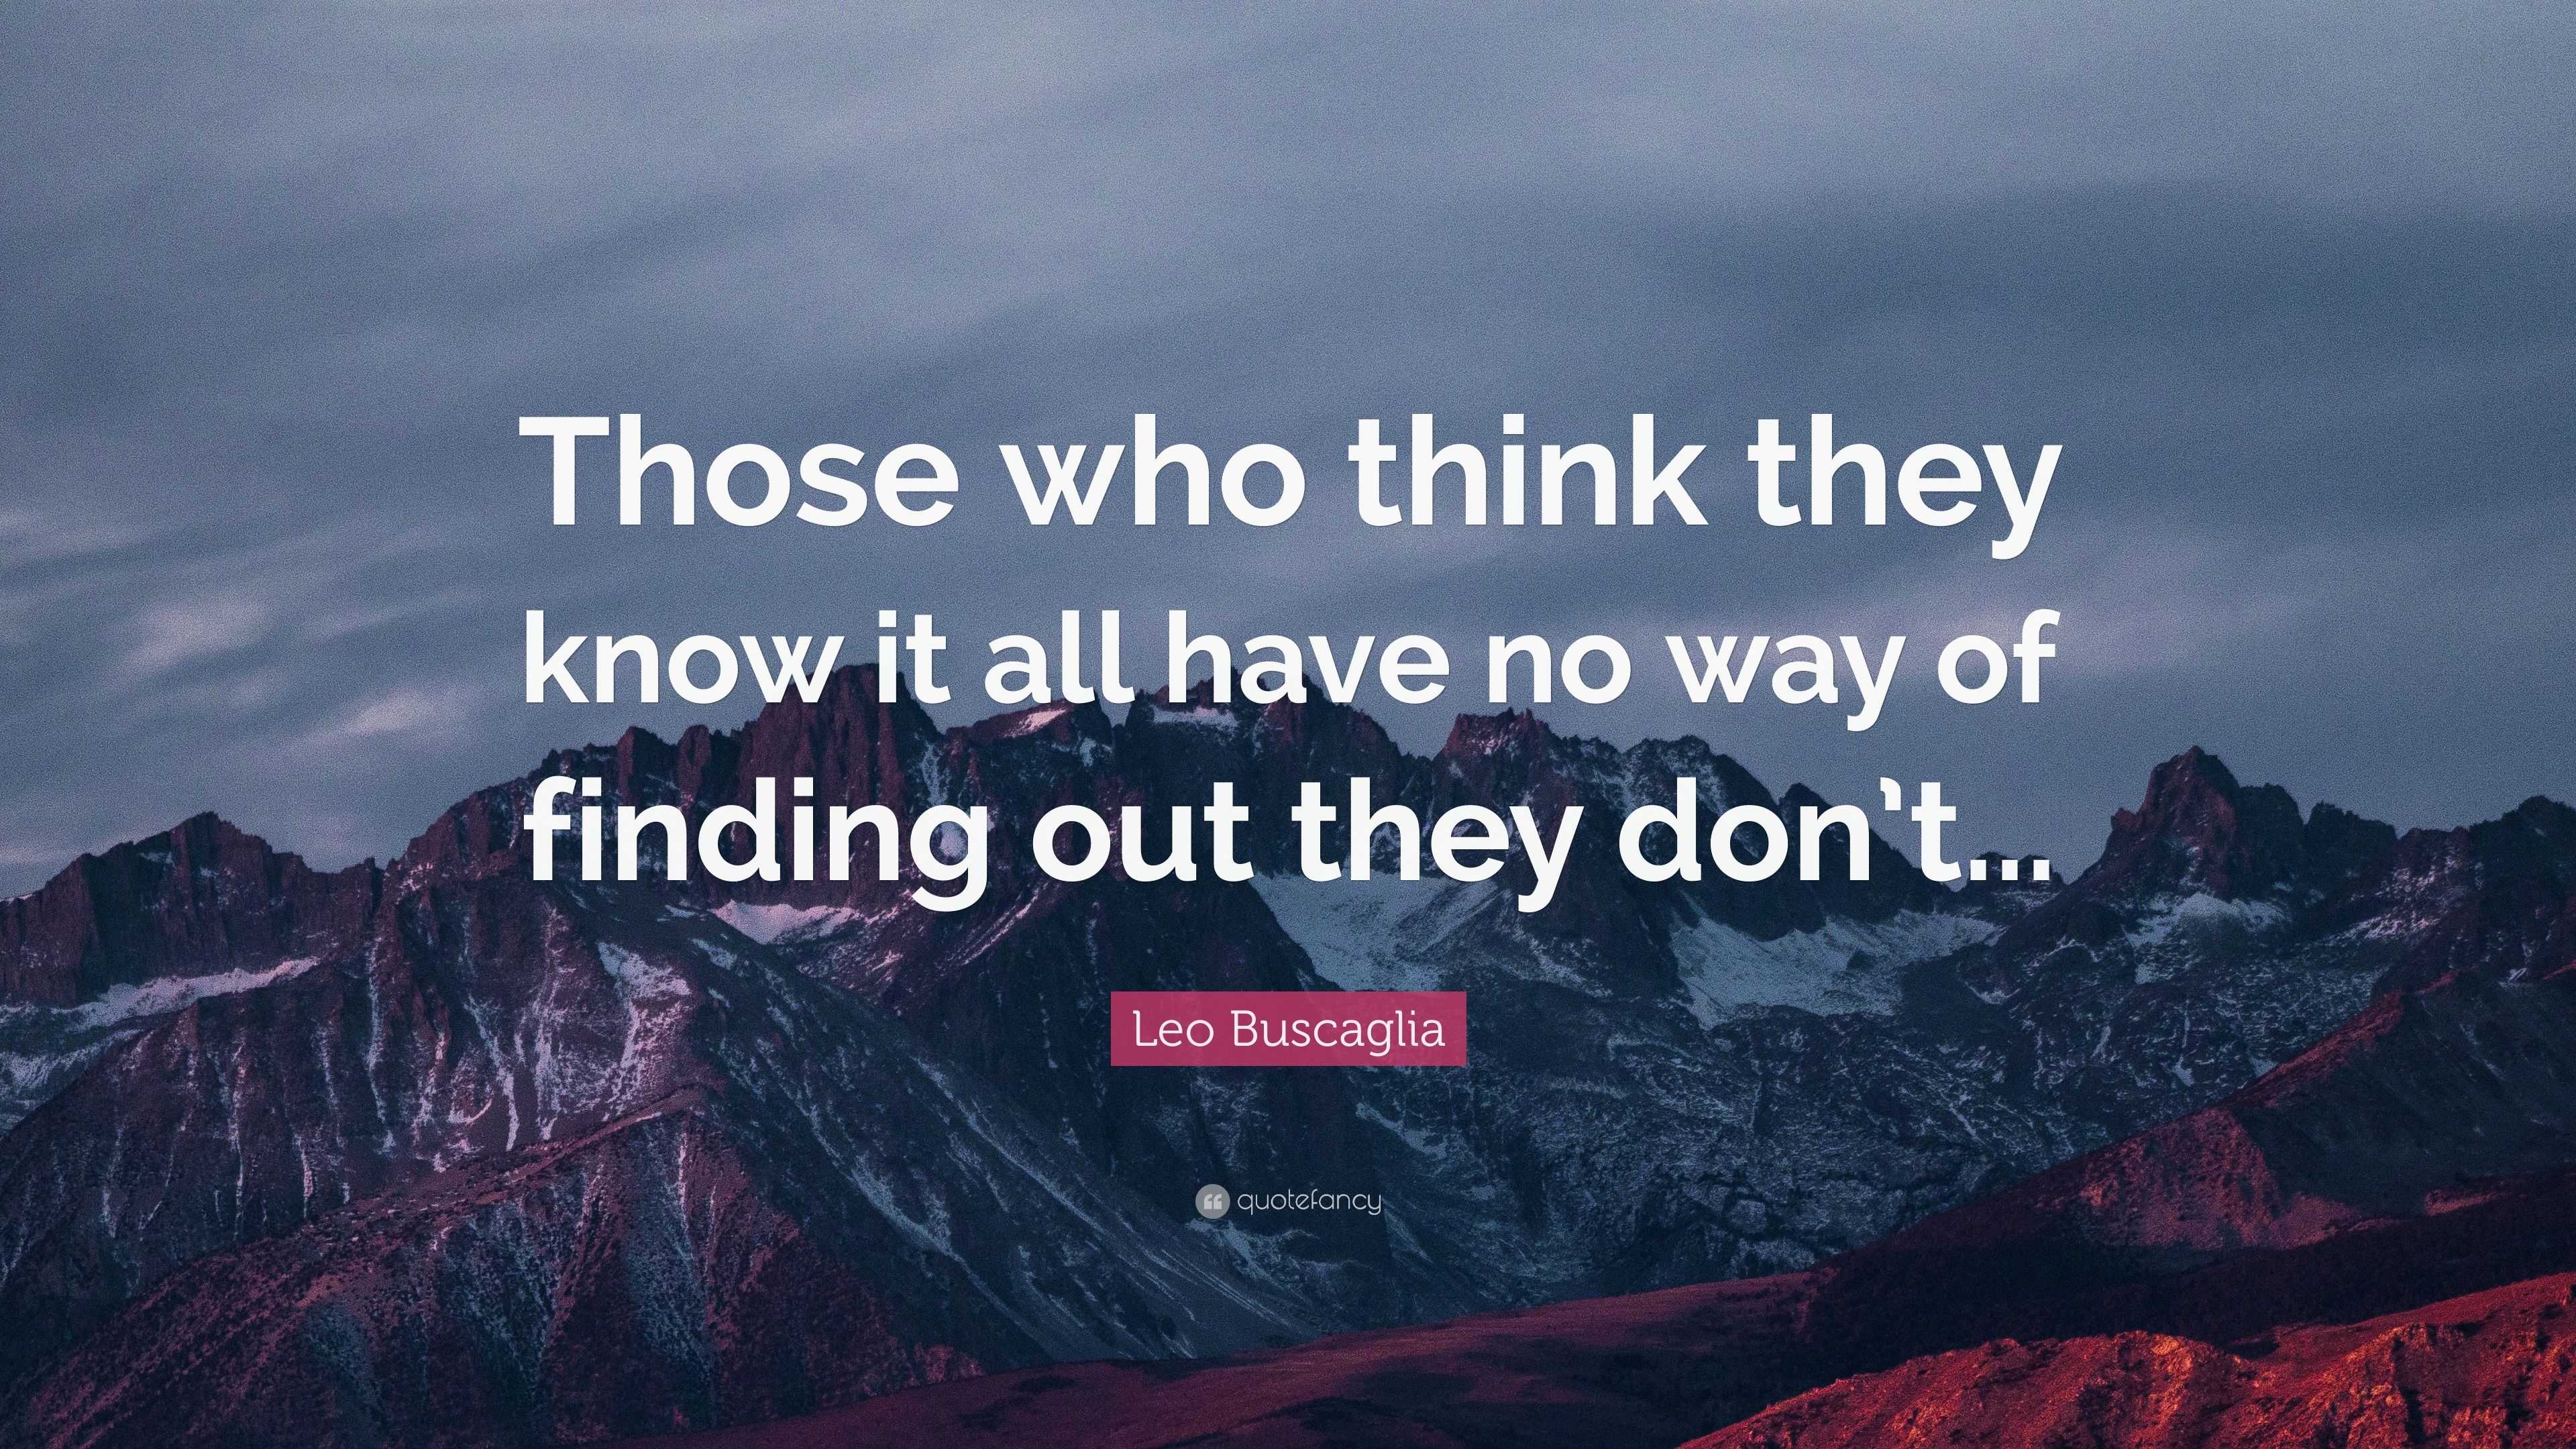 Leo Buscaglia Quote: “Those who think they know it all have no way of ...